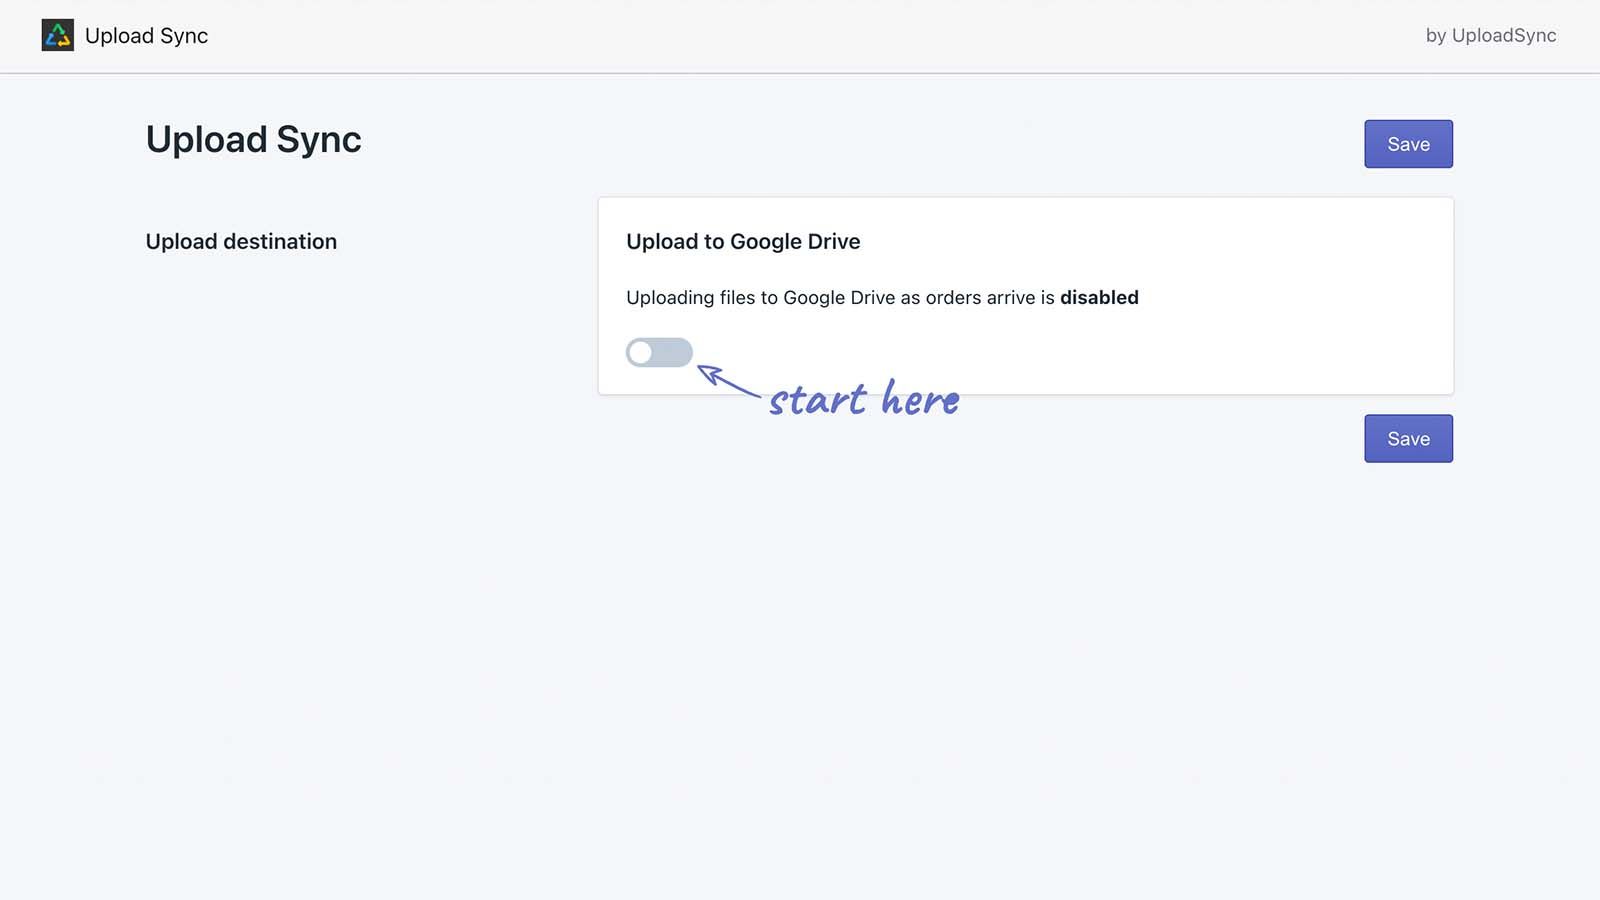 Upload Sync's 'Getting started' screen